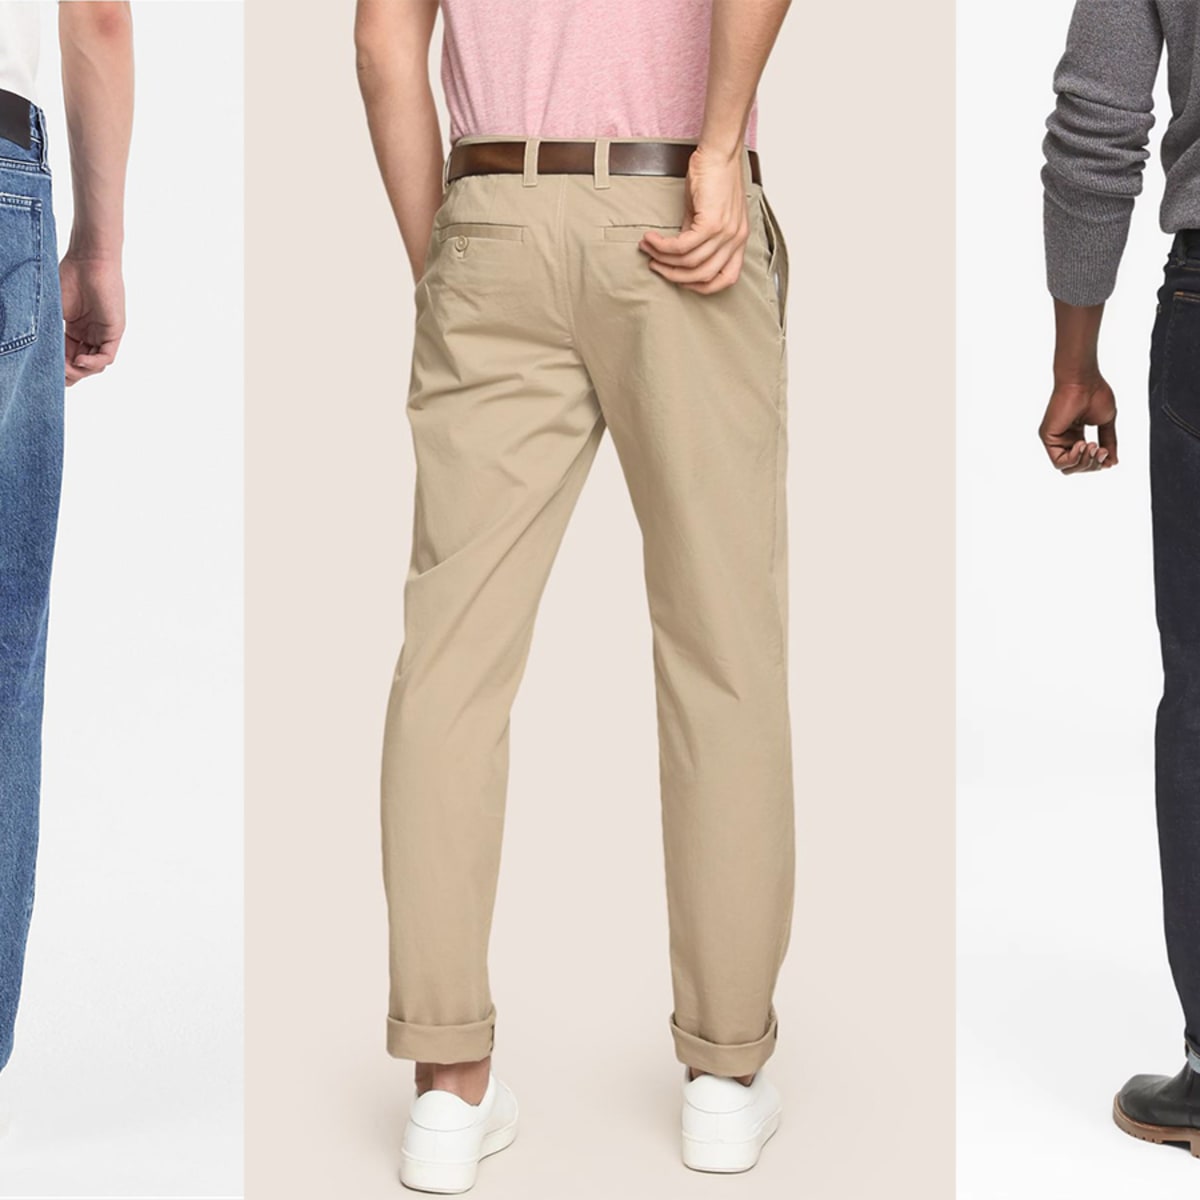 Best Golf Pants 2022 The 8 best mens pants on the market right now